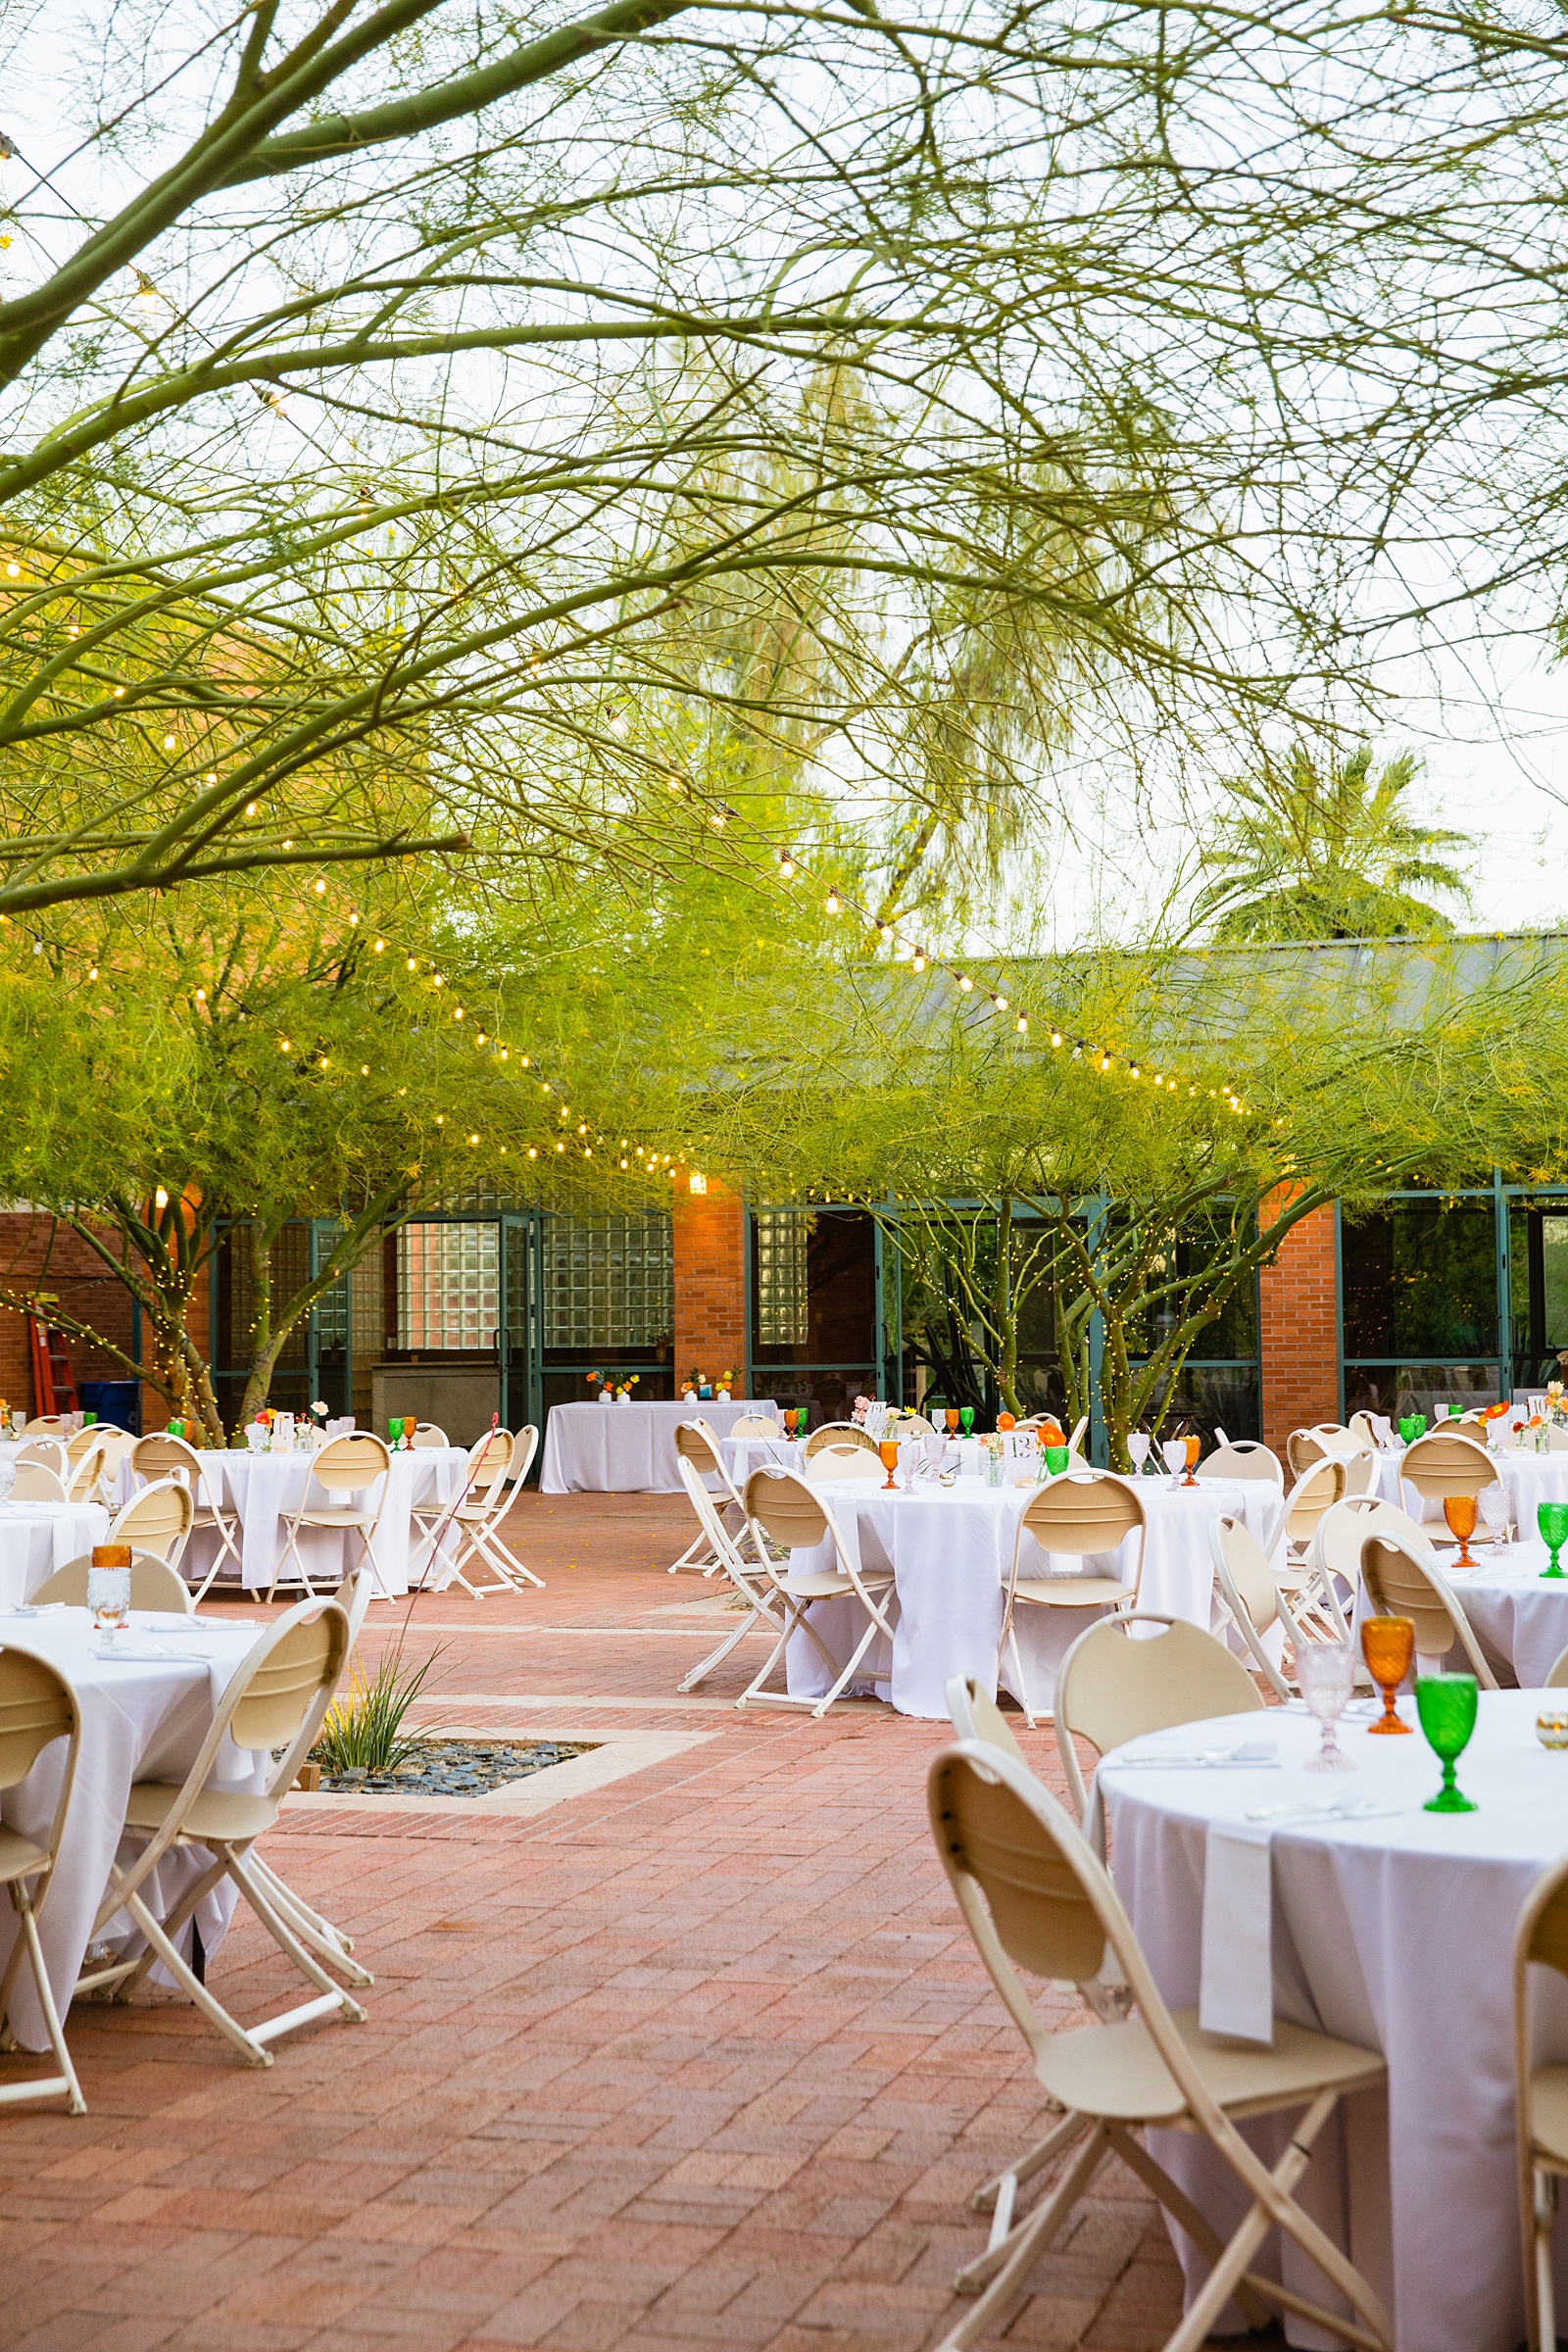 Eclectic reception decorations at Arizona Historical Society wedding reception by Tempe wedding photographer PMA Photography.